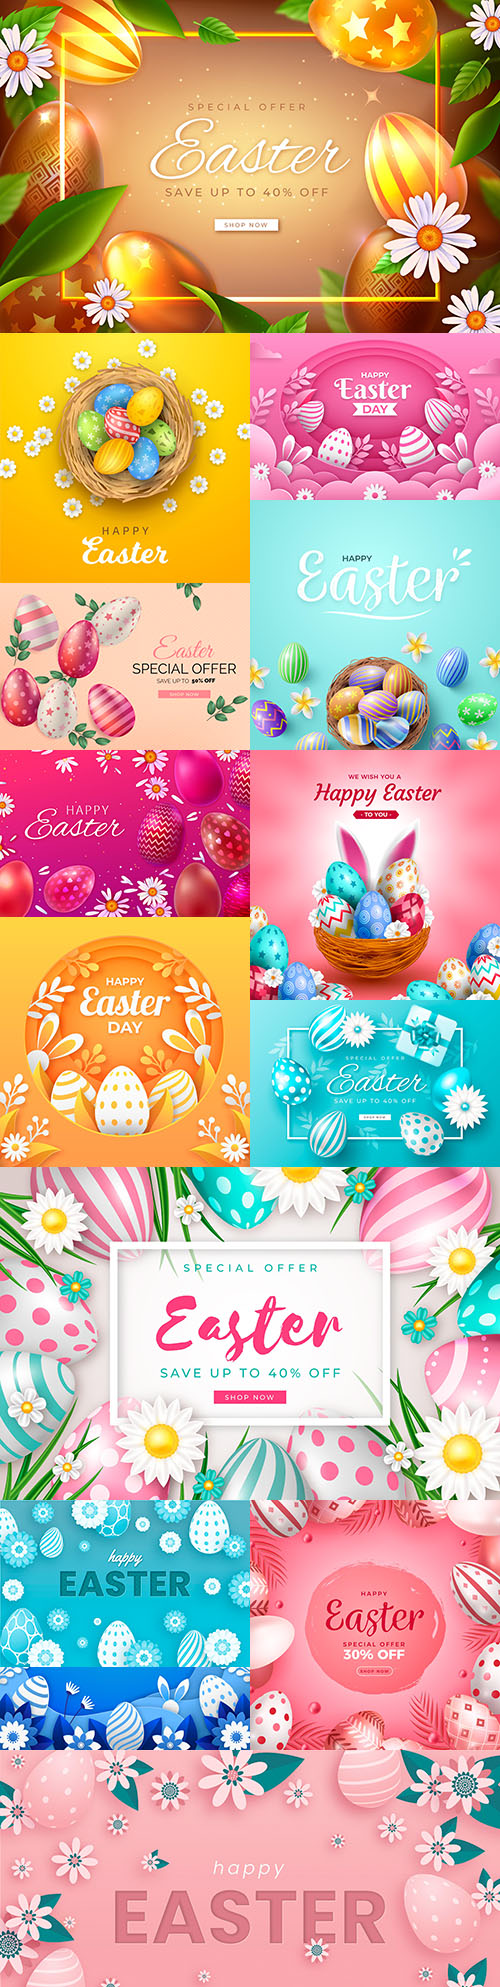 Bright Easter sale realistic illustration in paper style
